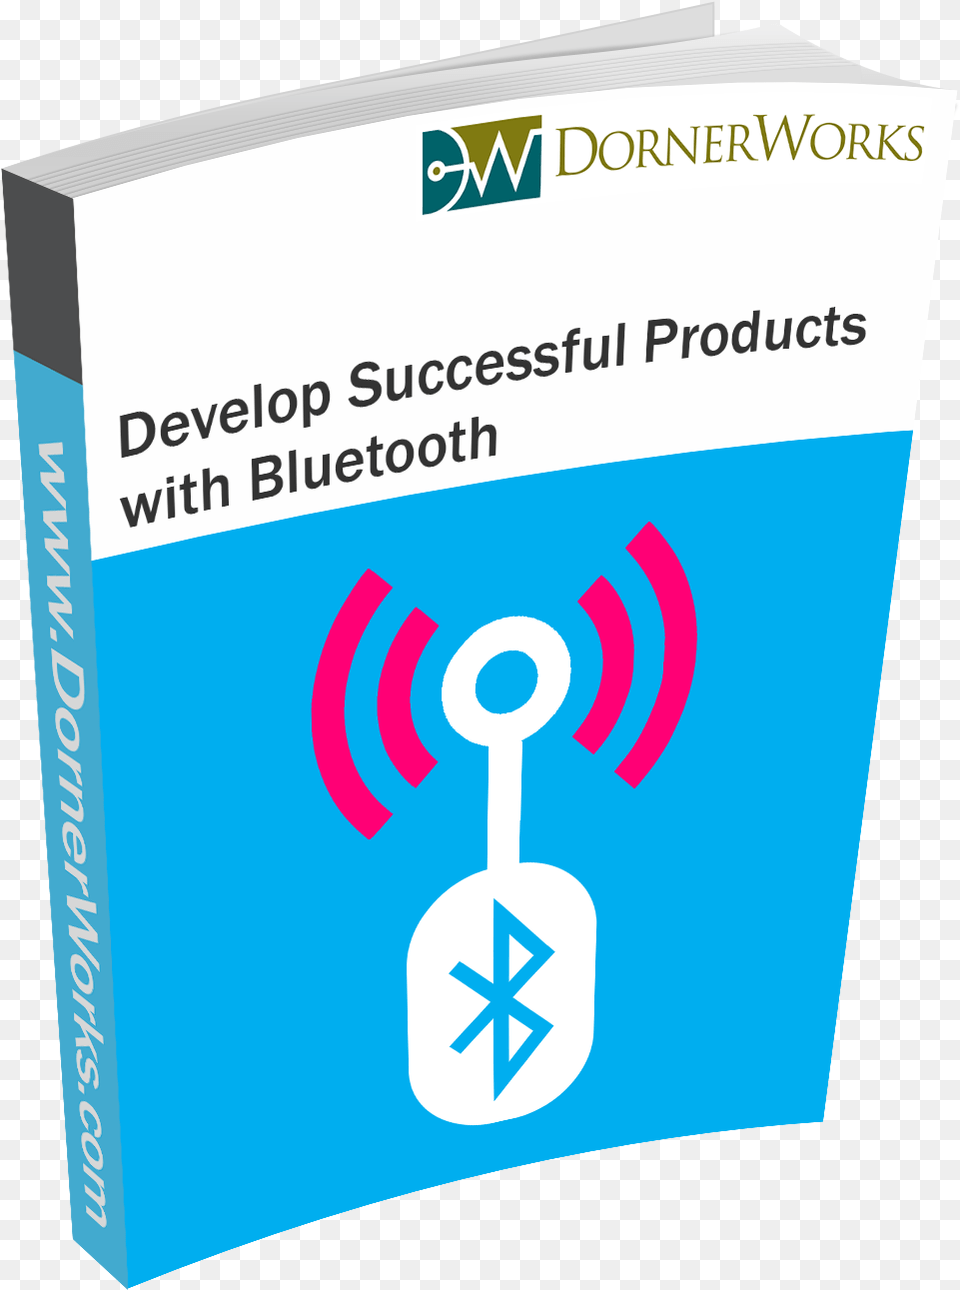 Learn To Develop Successful Products With Bluetooth Hypervisor, Book, Publication Png Image